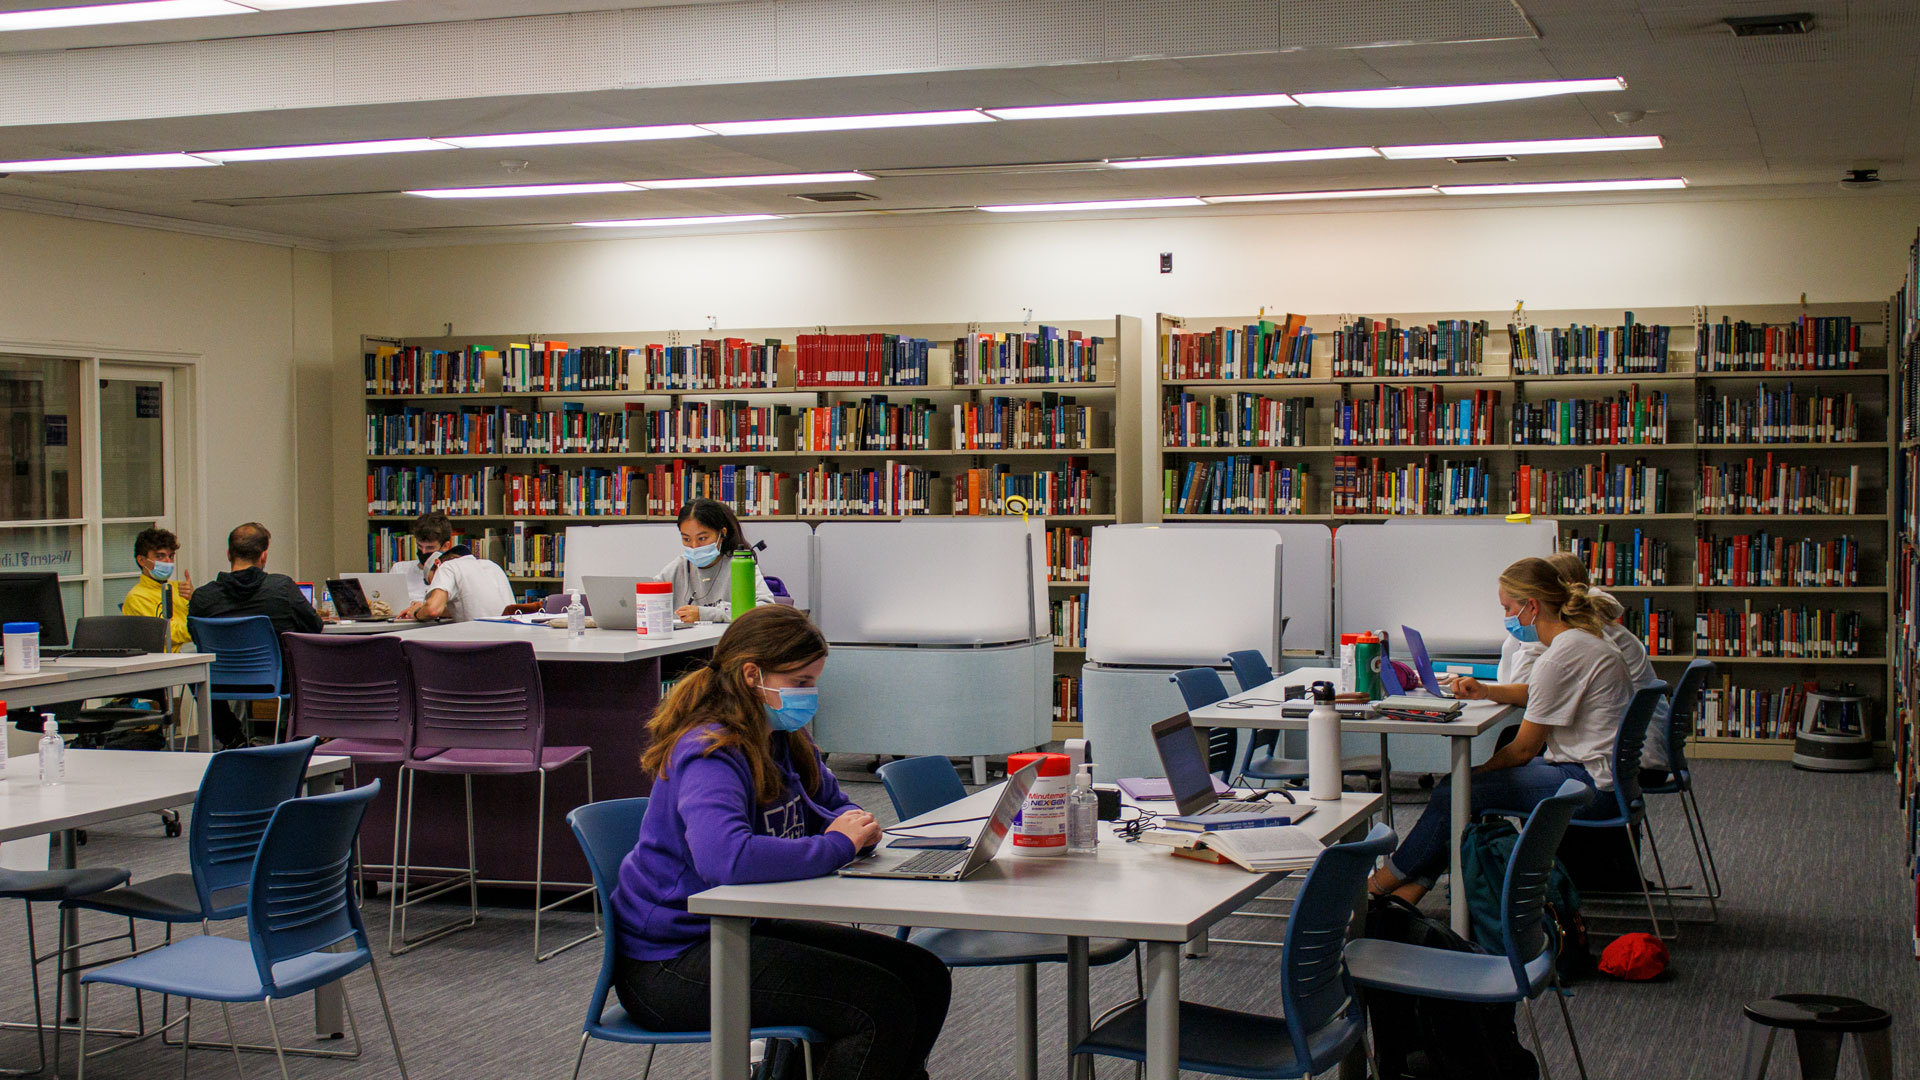 The Music Library’s open study room with people using the group and individual study tables.